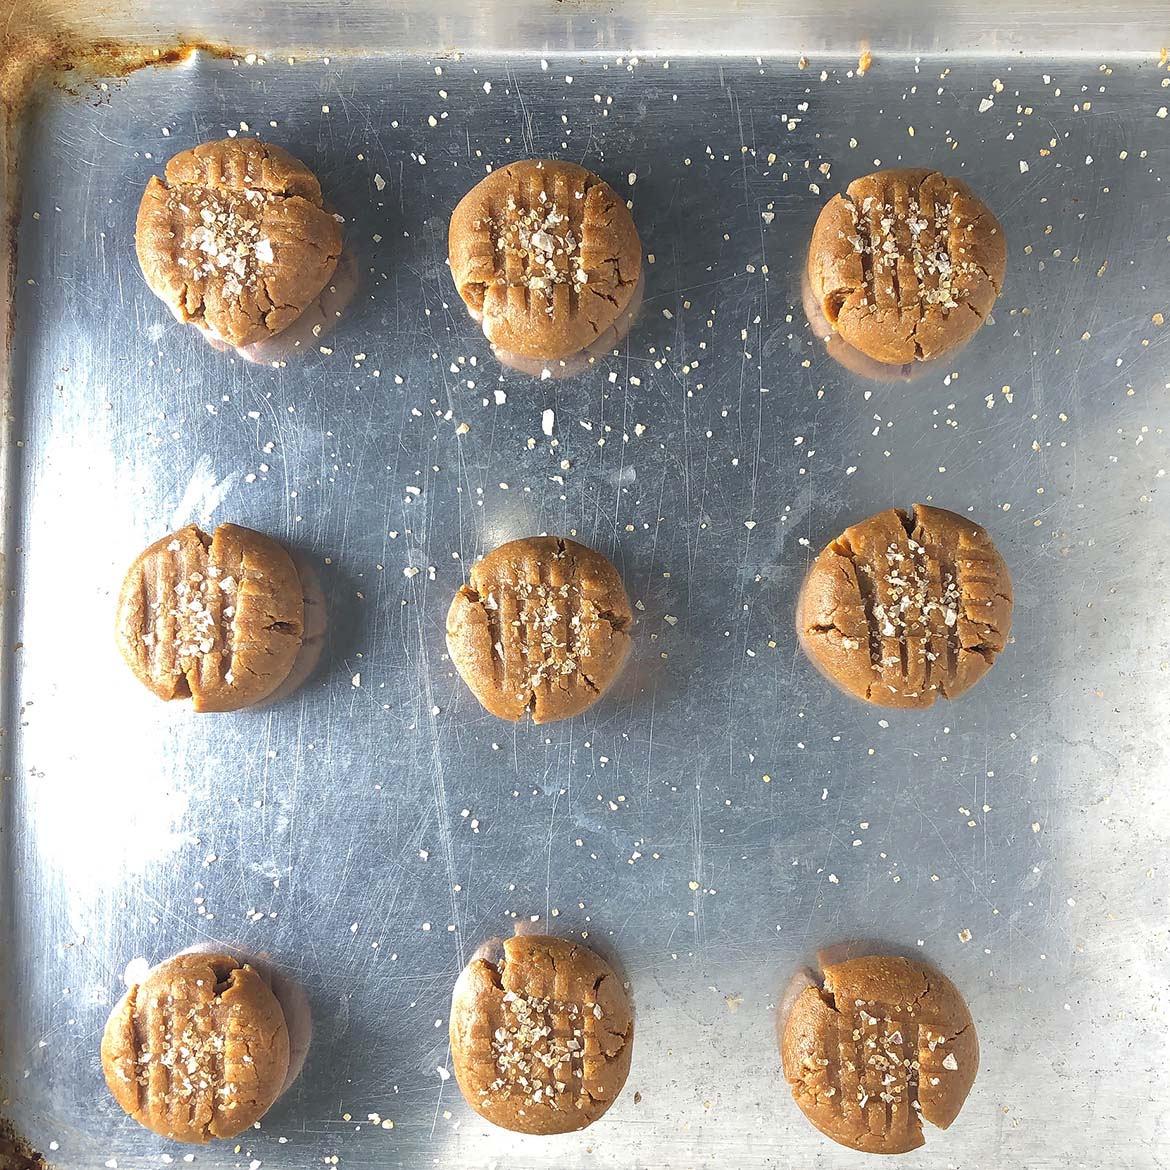 Top-down view of Peanut Butter Cookies on baking sheet, sprinkled with salt and sugar topping.